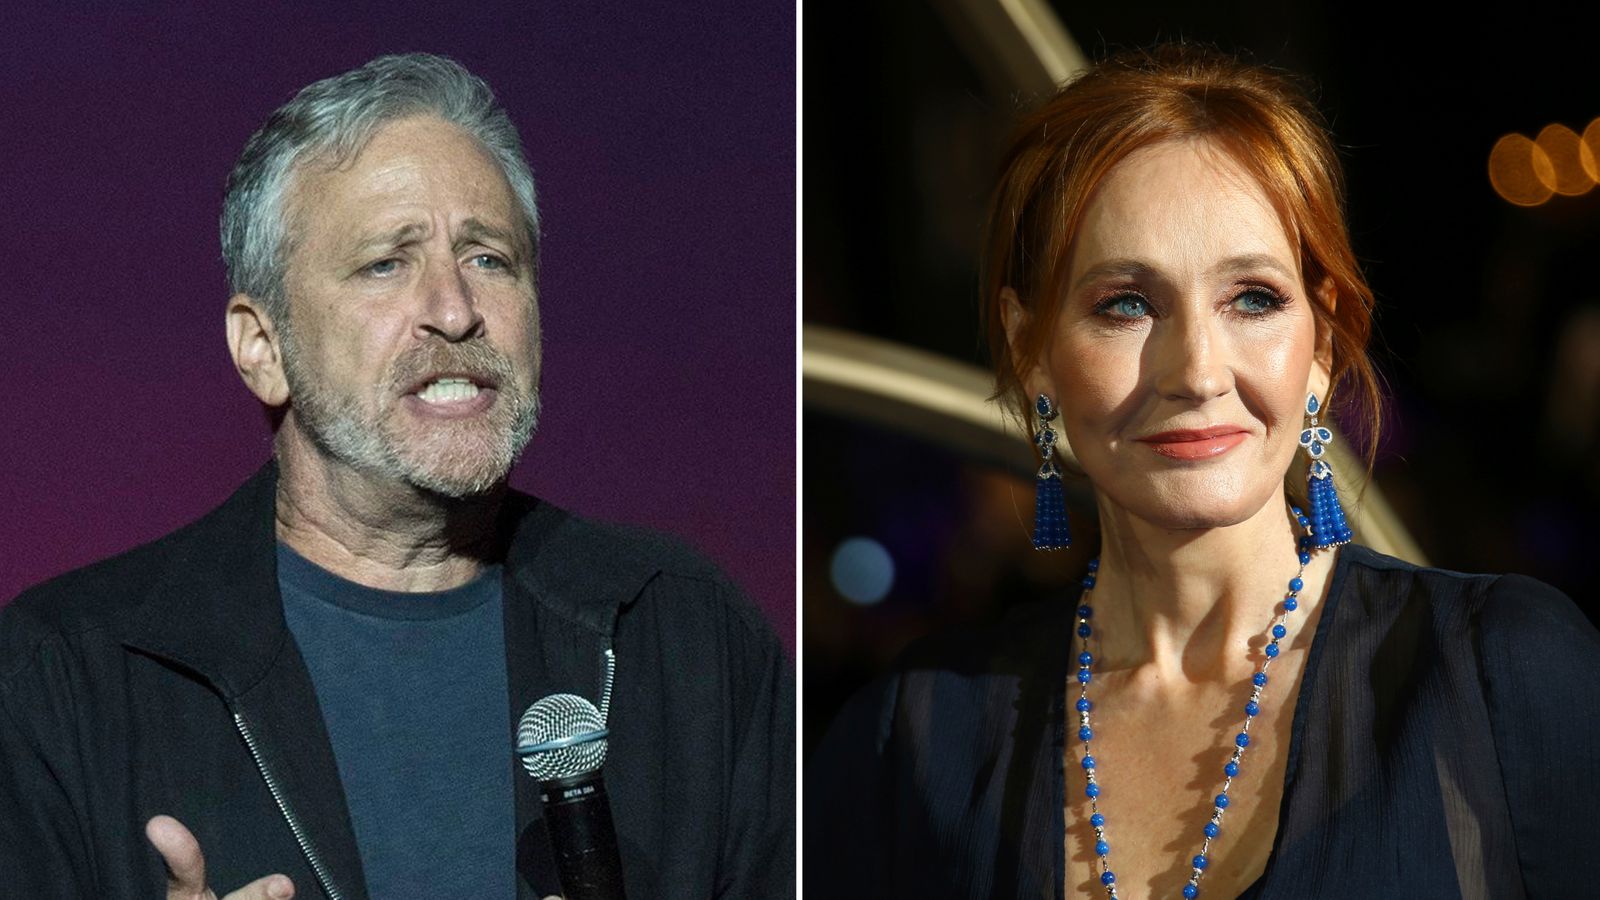 Jon Stewart insists ‘I do not think JK Rowling is antisemitic’ following Harry Potter comments